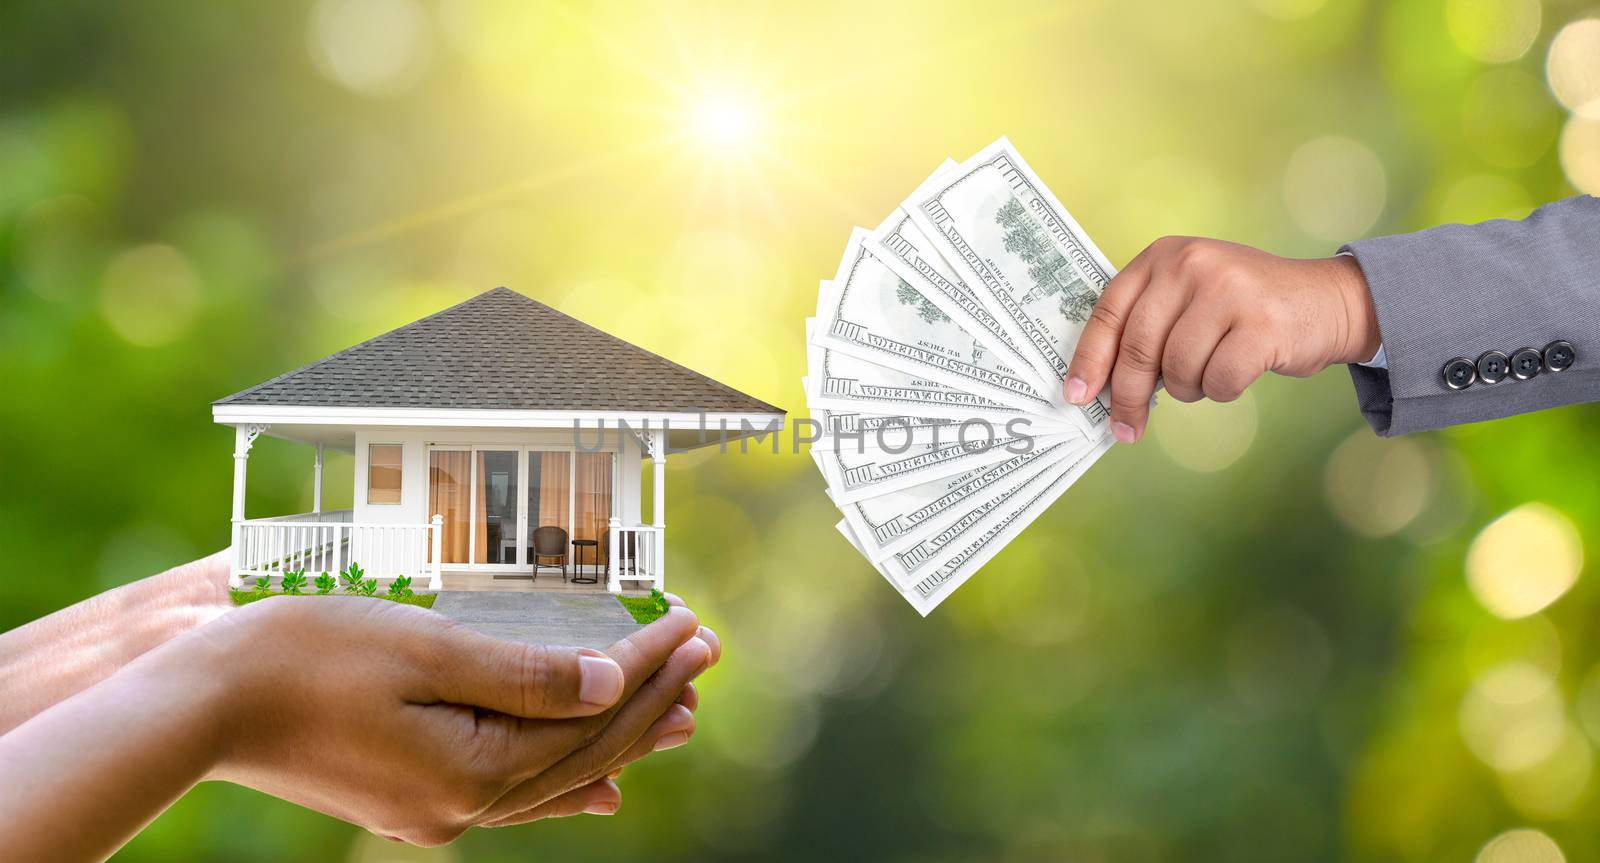 The hands of a businessman hold money and the other hand holds a house. The idea of saving money to buy a house